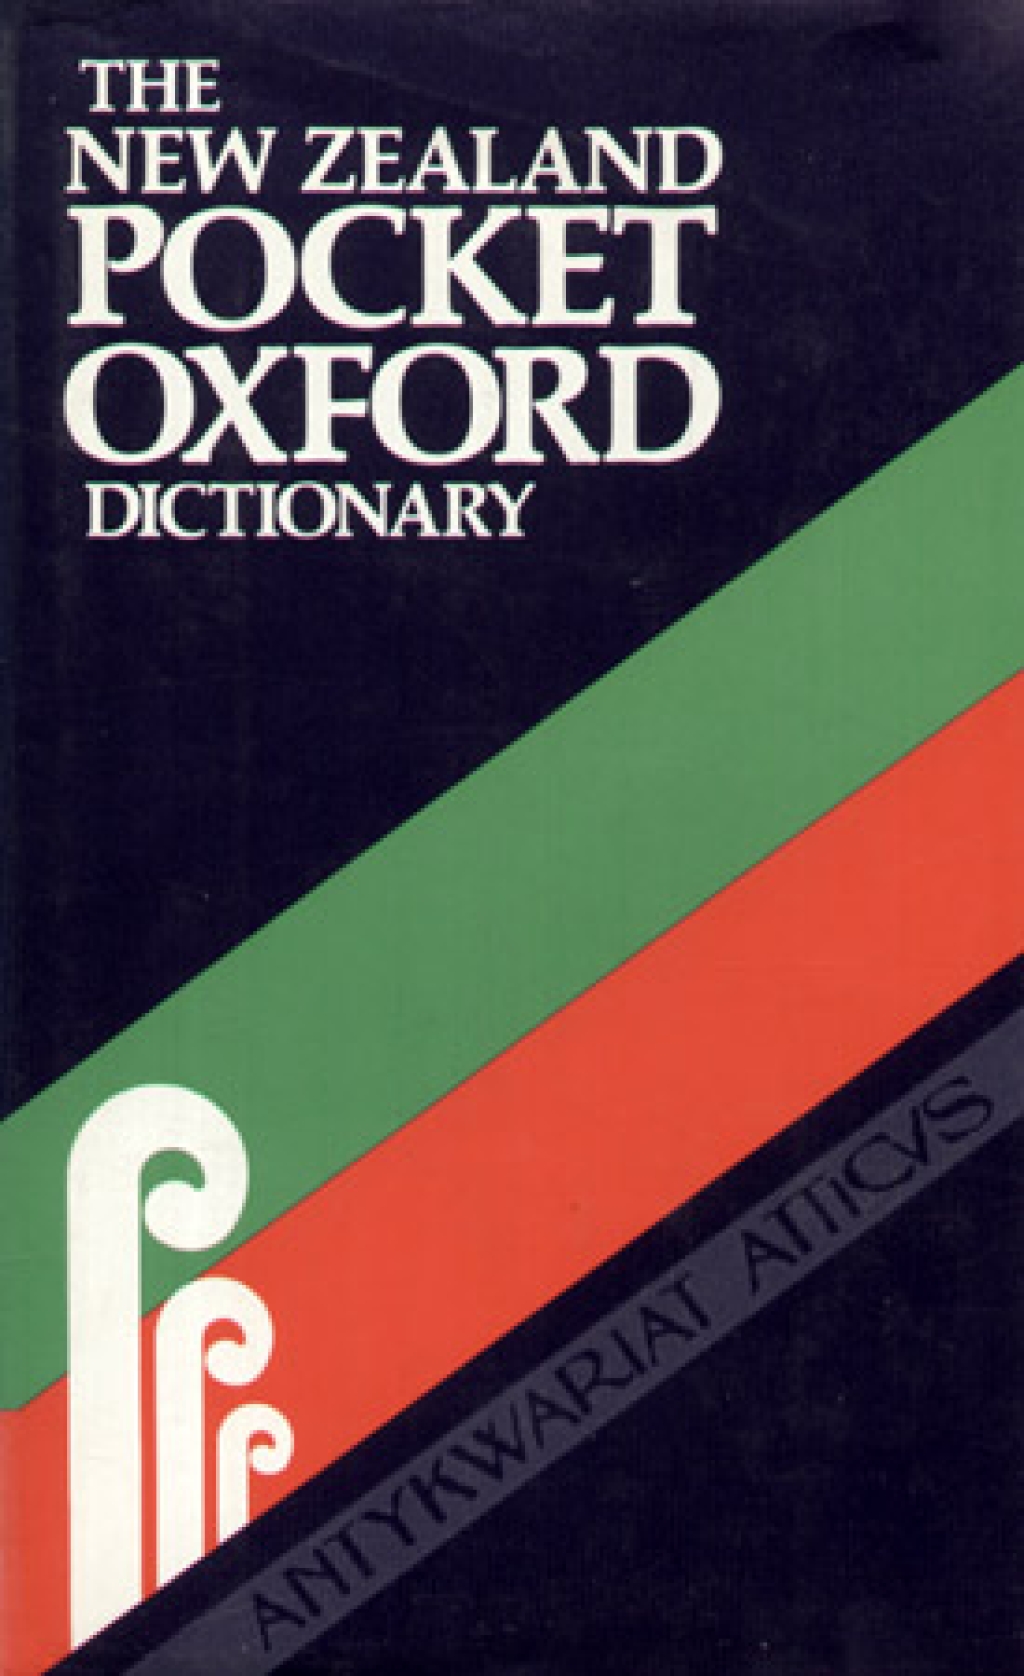 The New Zeland Pocket Oxford Dictionary